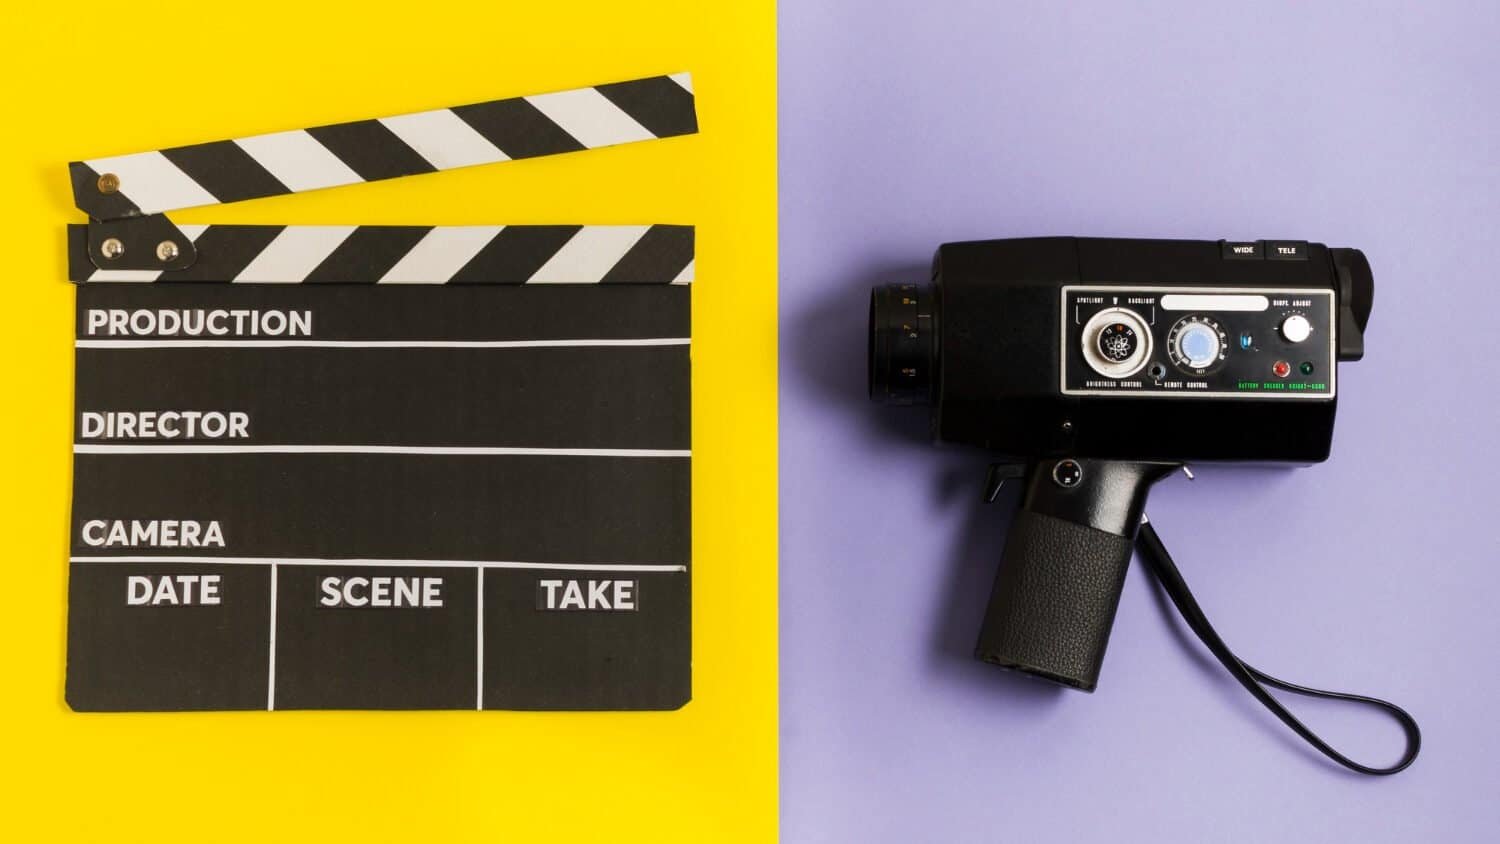 Digital film and video production companies